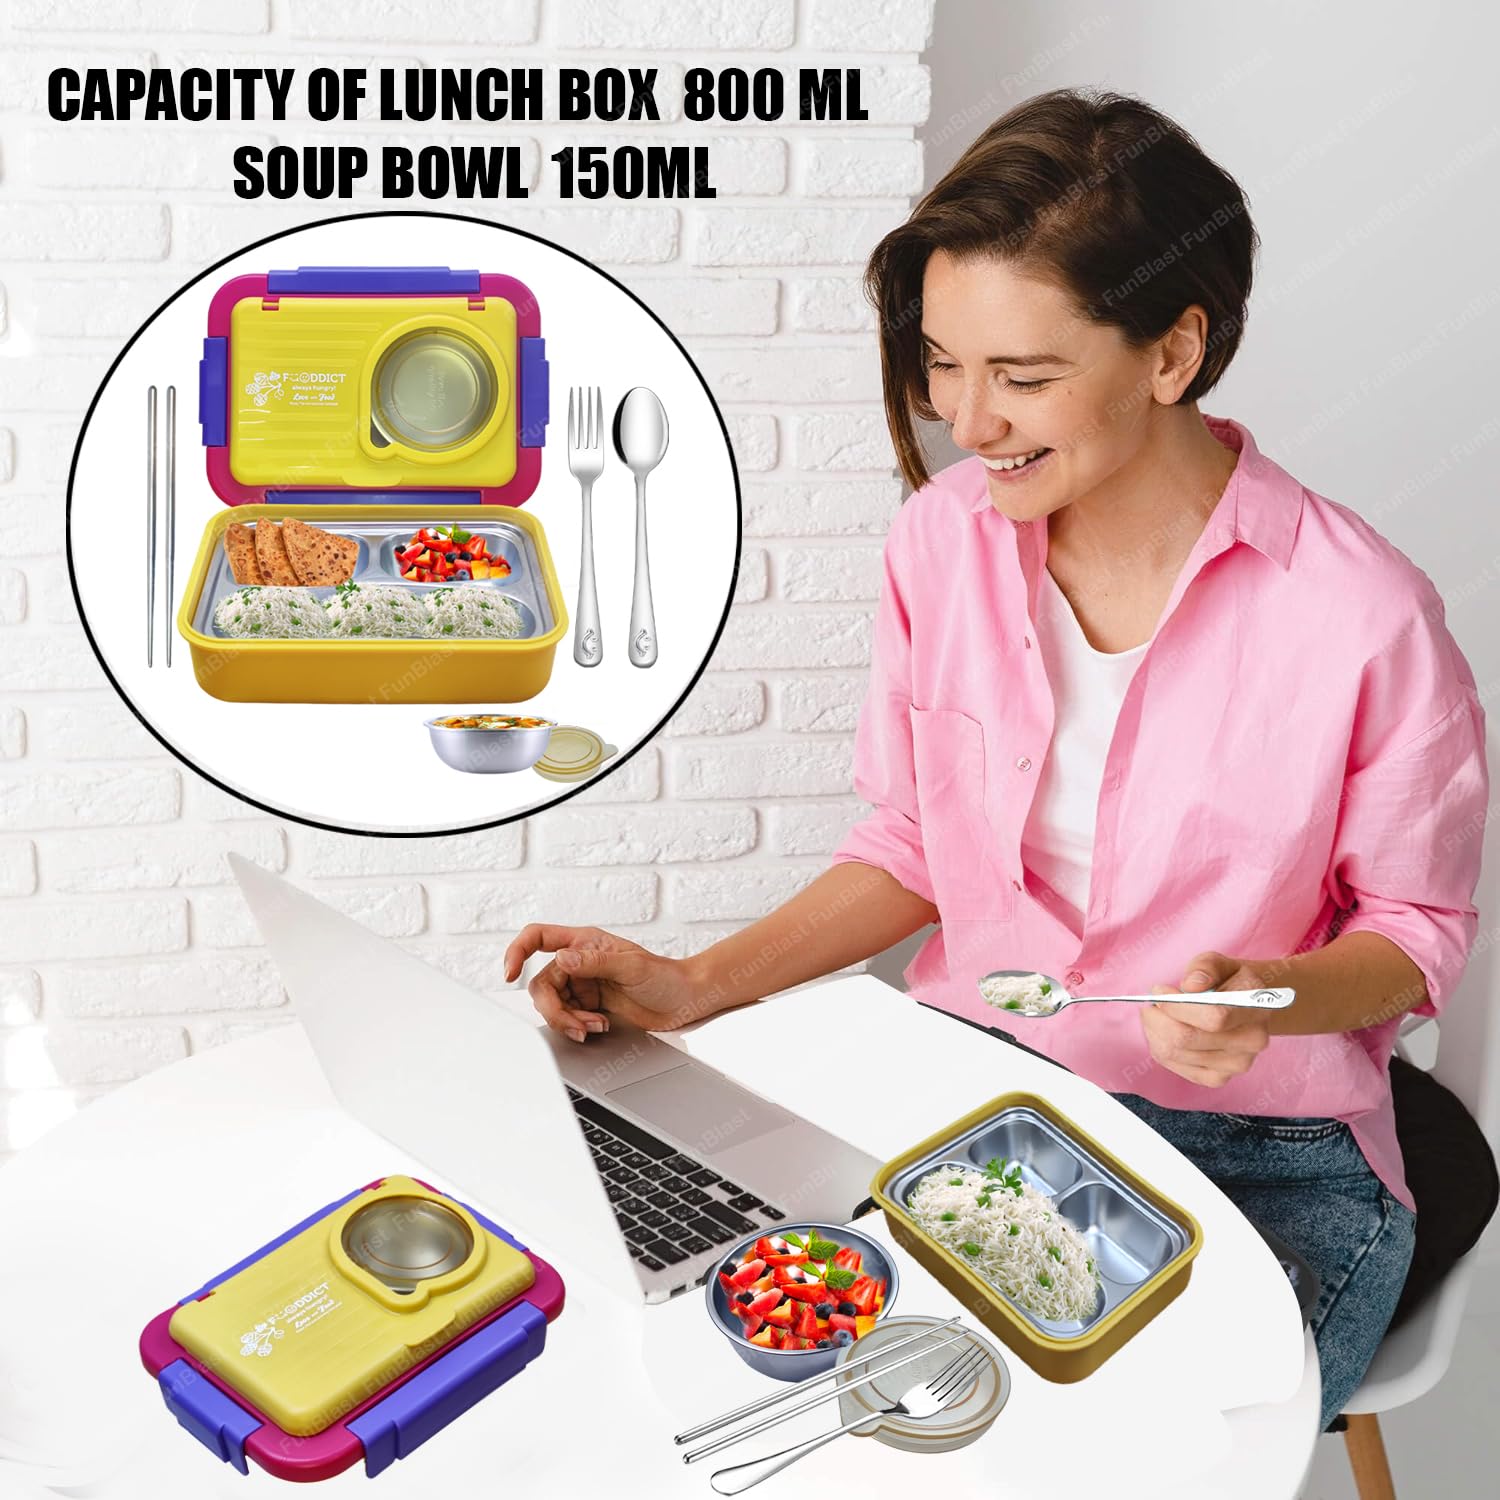 Lunch Box for Kids – Stainless Steel Lunch Box, 6 Compartment Lunch Box with Bowl, Spoon, Fork & Chopstick, Tiffin Box, Insulated Bento Lunch Box for Kids (Yellow)